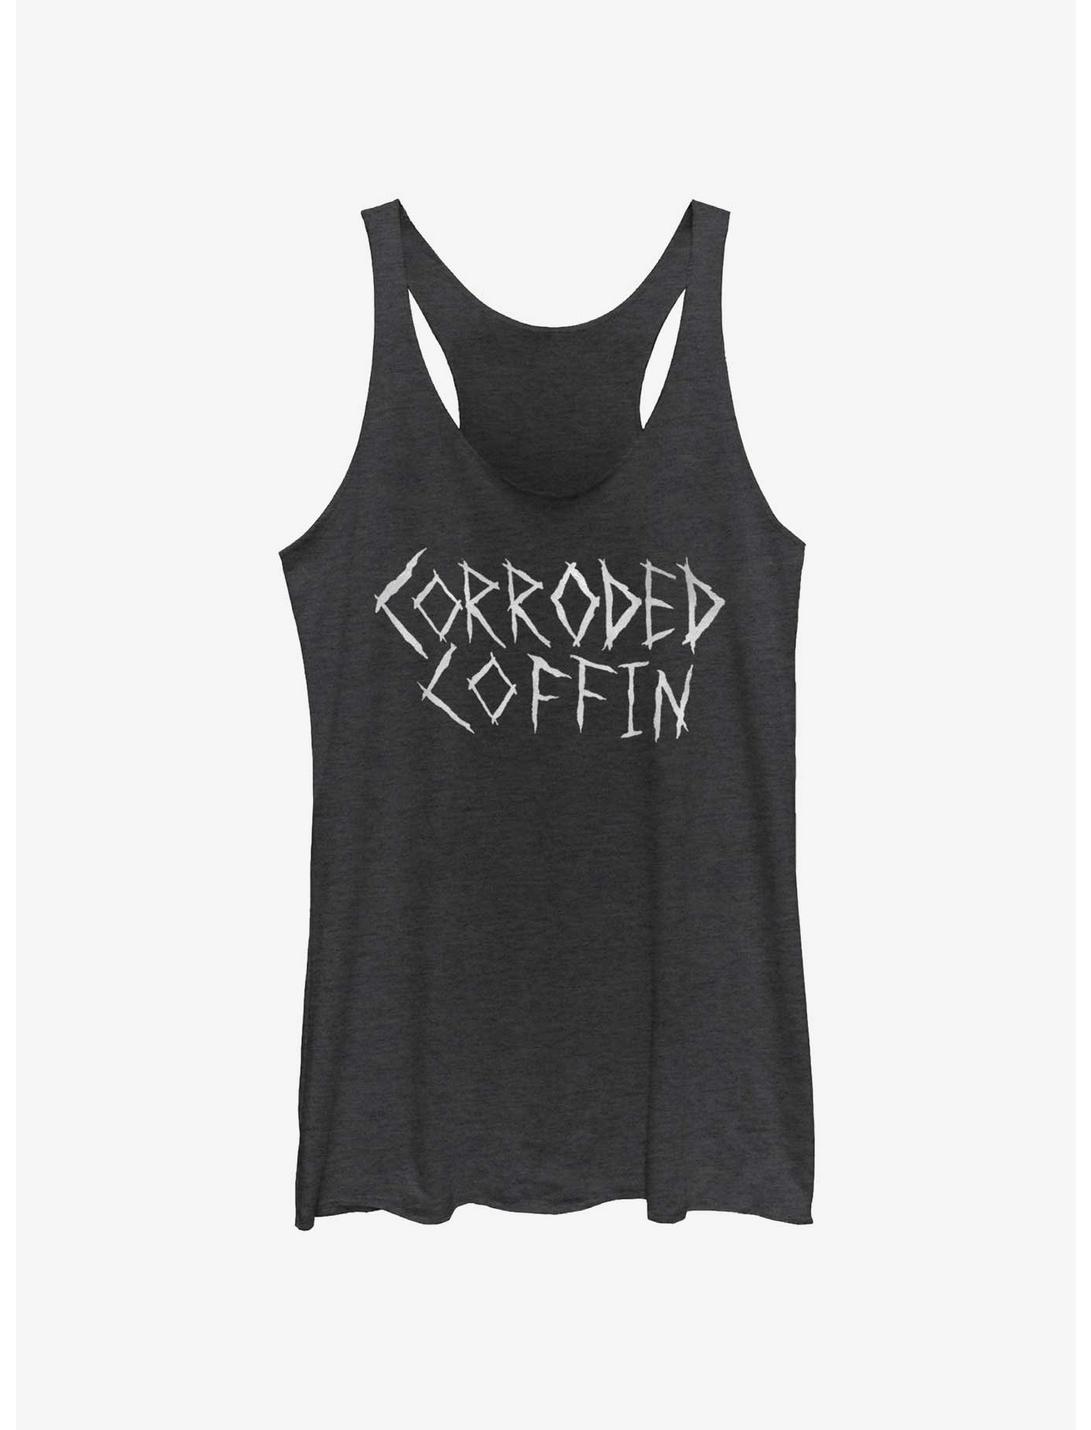 Stranger Things Corroded Coffin Womens Tank Top, BLK HTR, hi-res